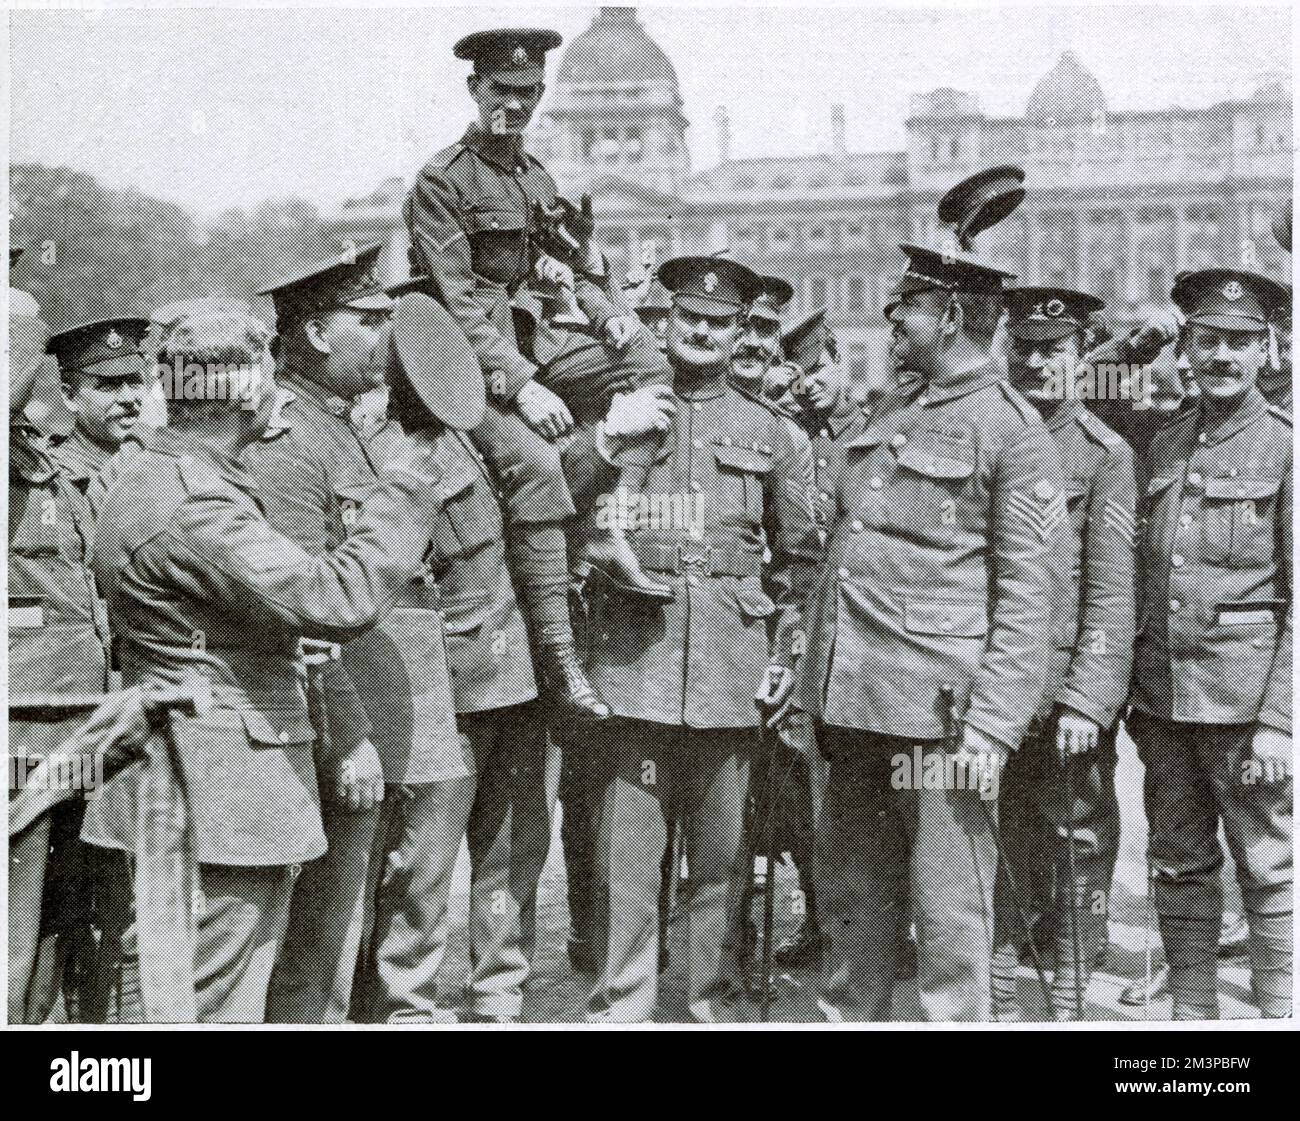 Lance-Corporal Edward Dwyer V.C. (1896-1916), pictured on a recruiting drive in Trafalgar Square in December 1915.  Know as the 'Little Corporal,' Dwyer won his Victoria Cross for action at Hill 60 on 20 April 1915 when he repelled a German attack on his trench by standing on the parapet and hurling hand grenades.  He later was killed on the Somme on the 3 September 1916.  He is seen here hoisted on the shoulders of men of his regiment - the East Surreys. Stock Photo